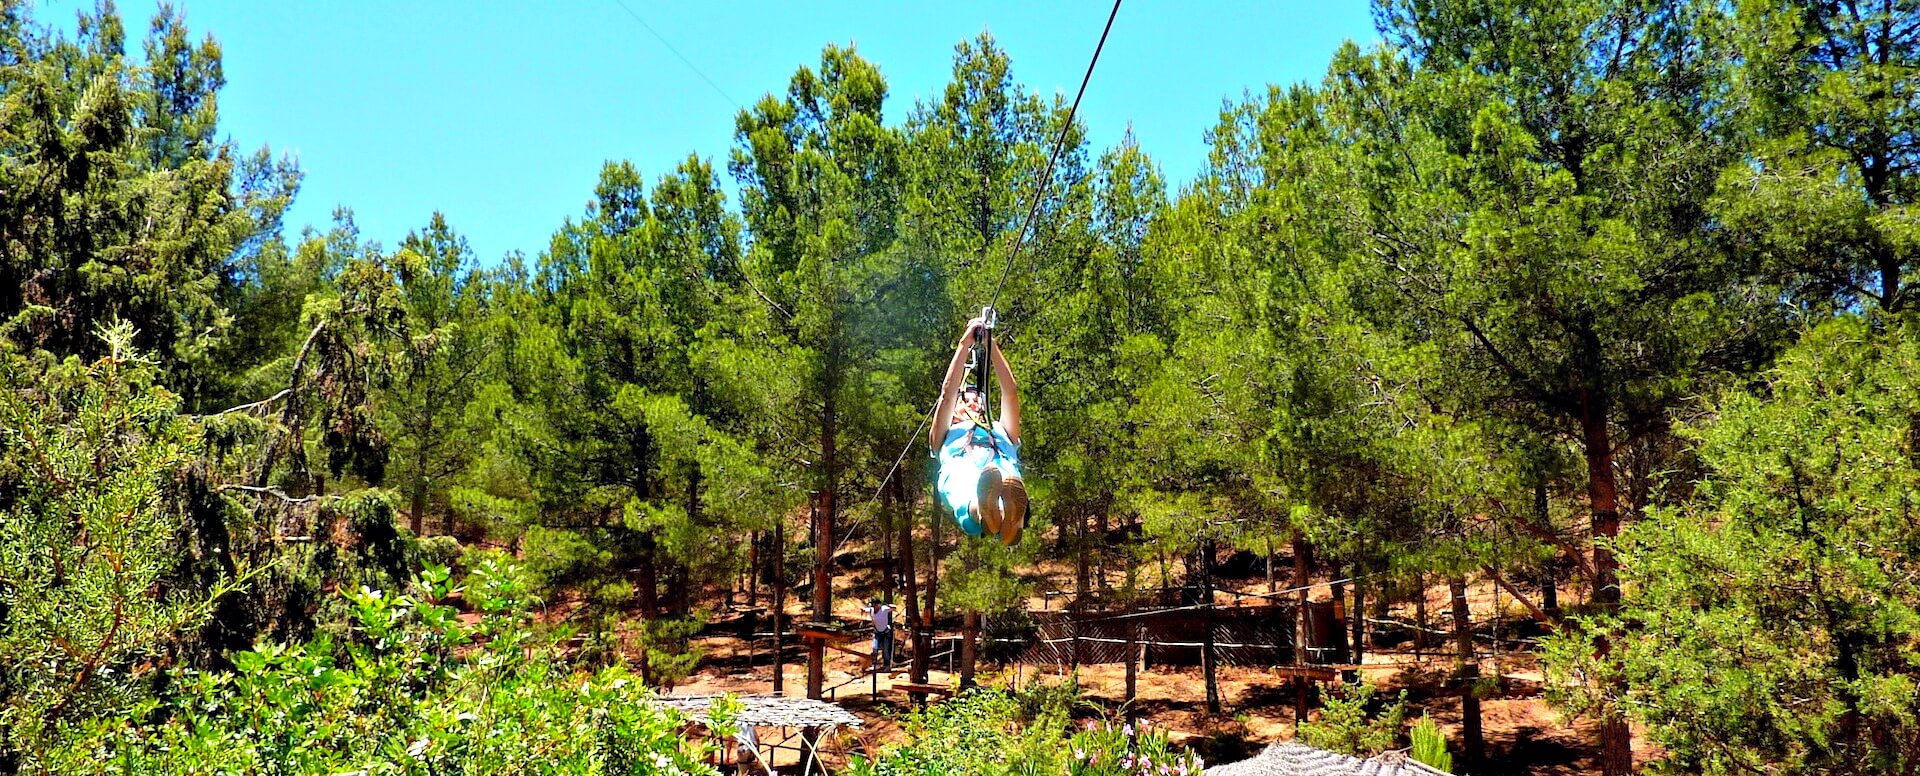 Adventure awaits in the trees - Marrakech